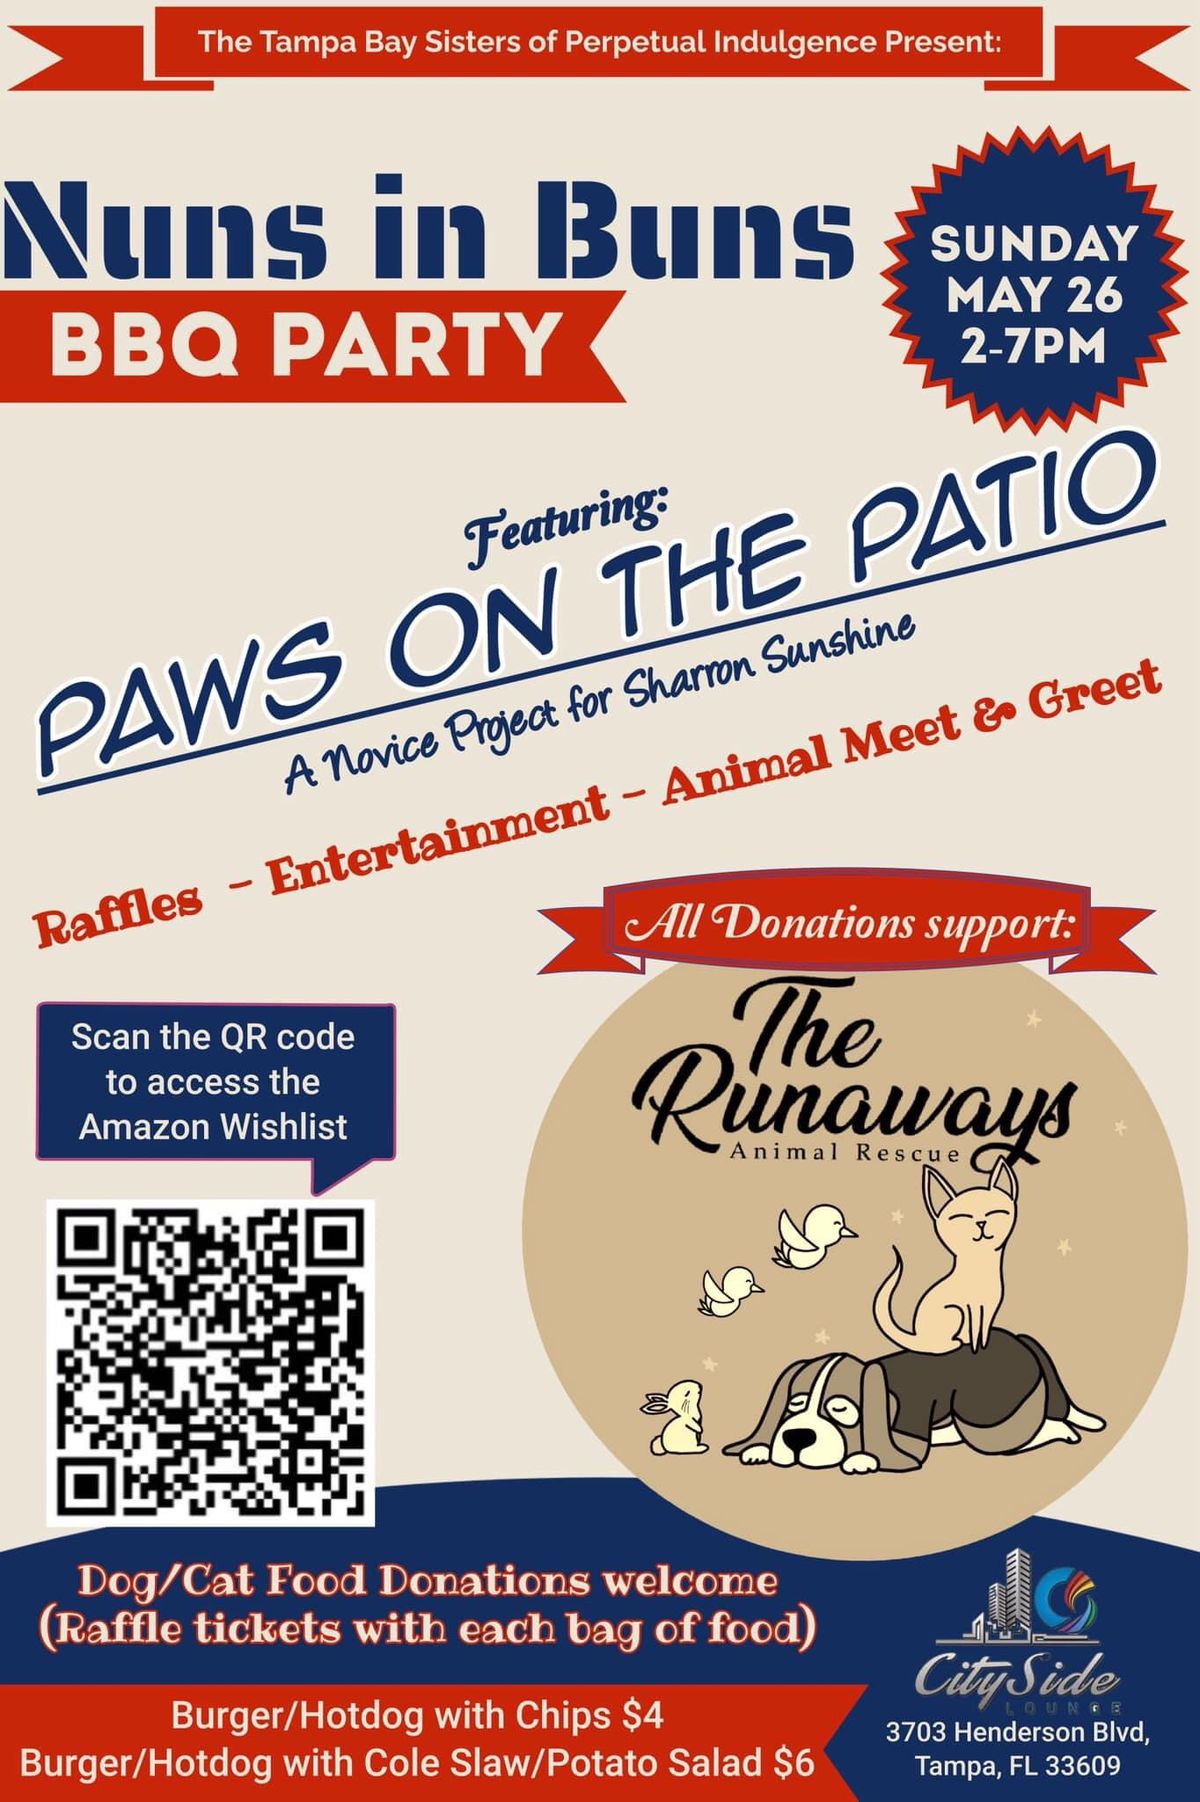 Nuns in Buns Featuring Paws on the Patio! 